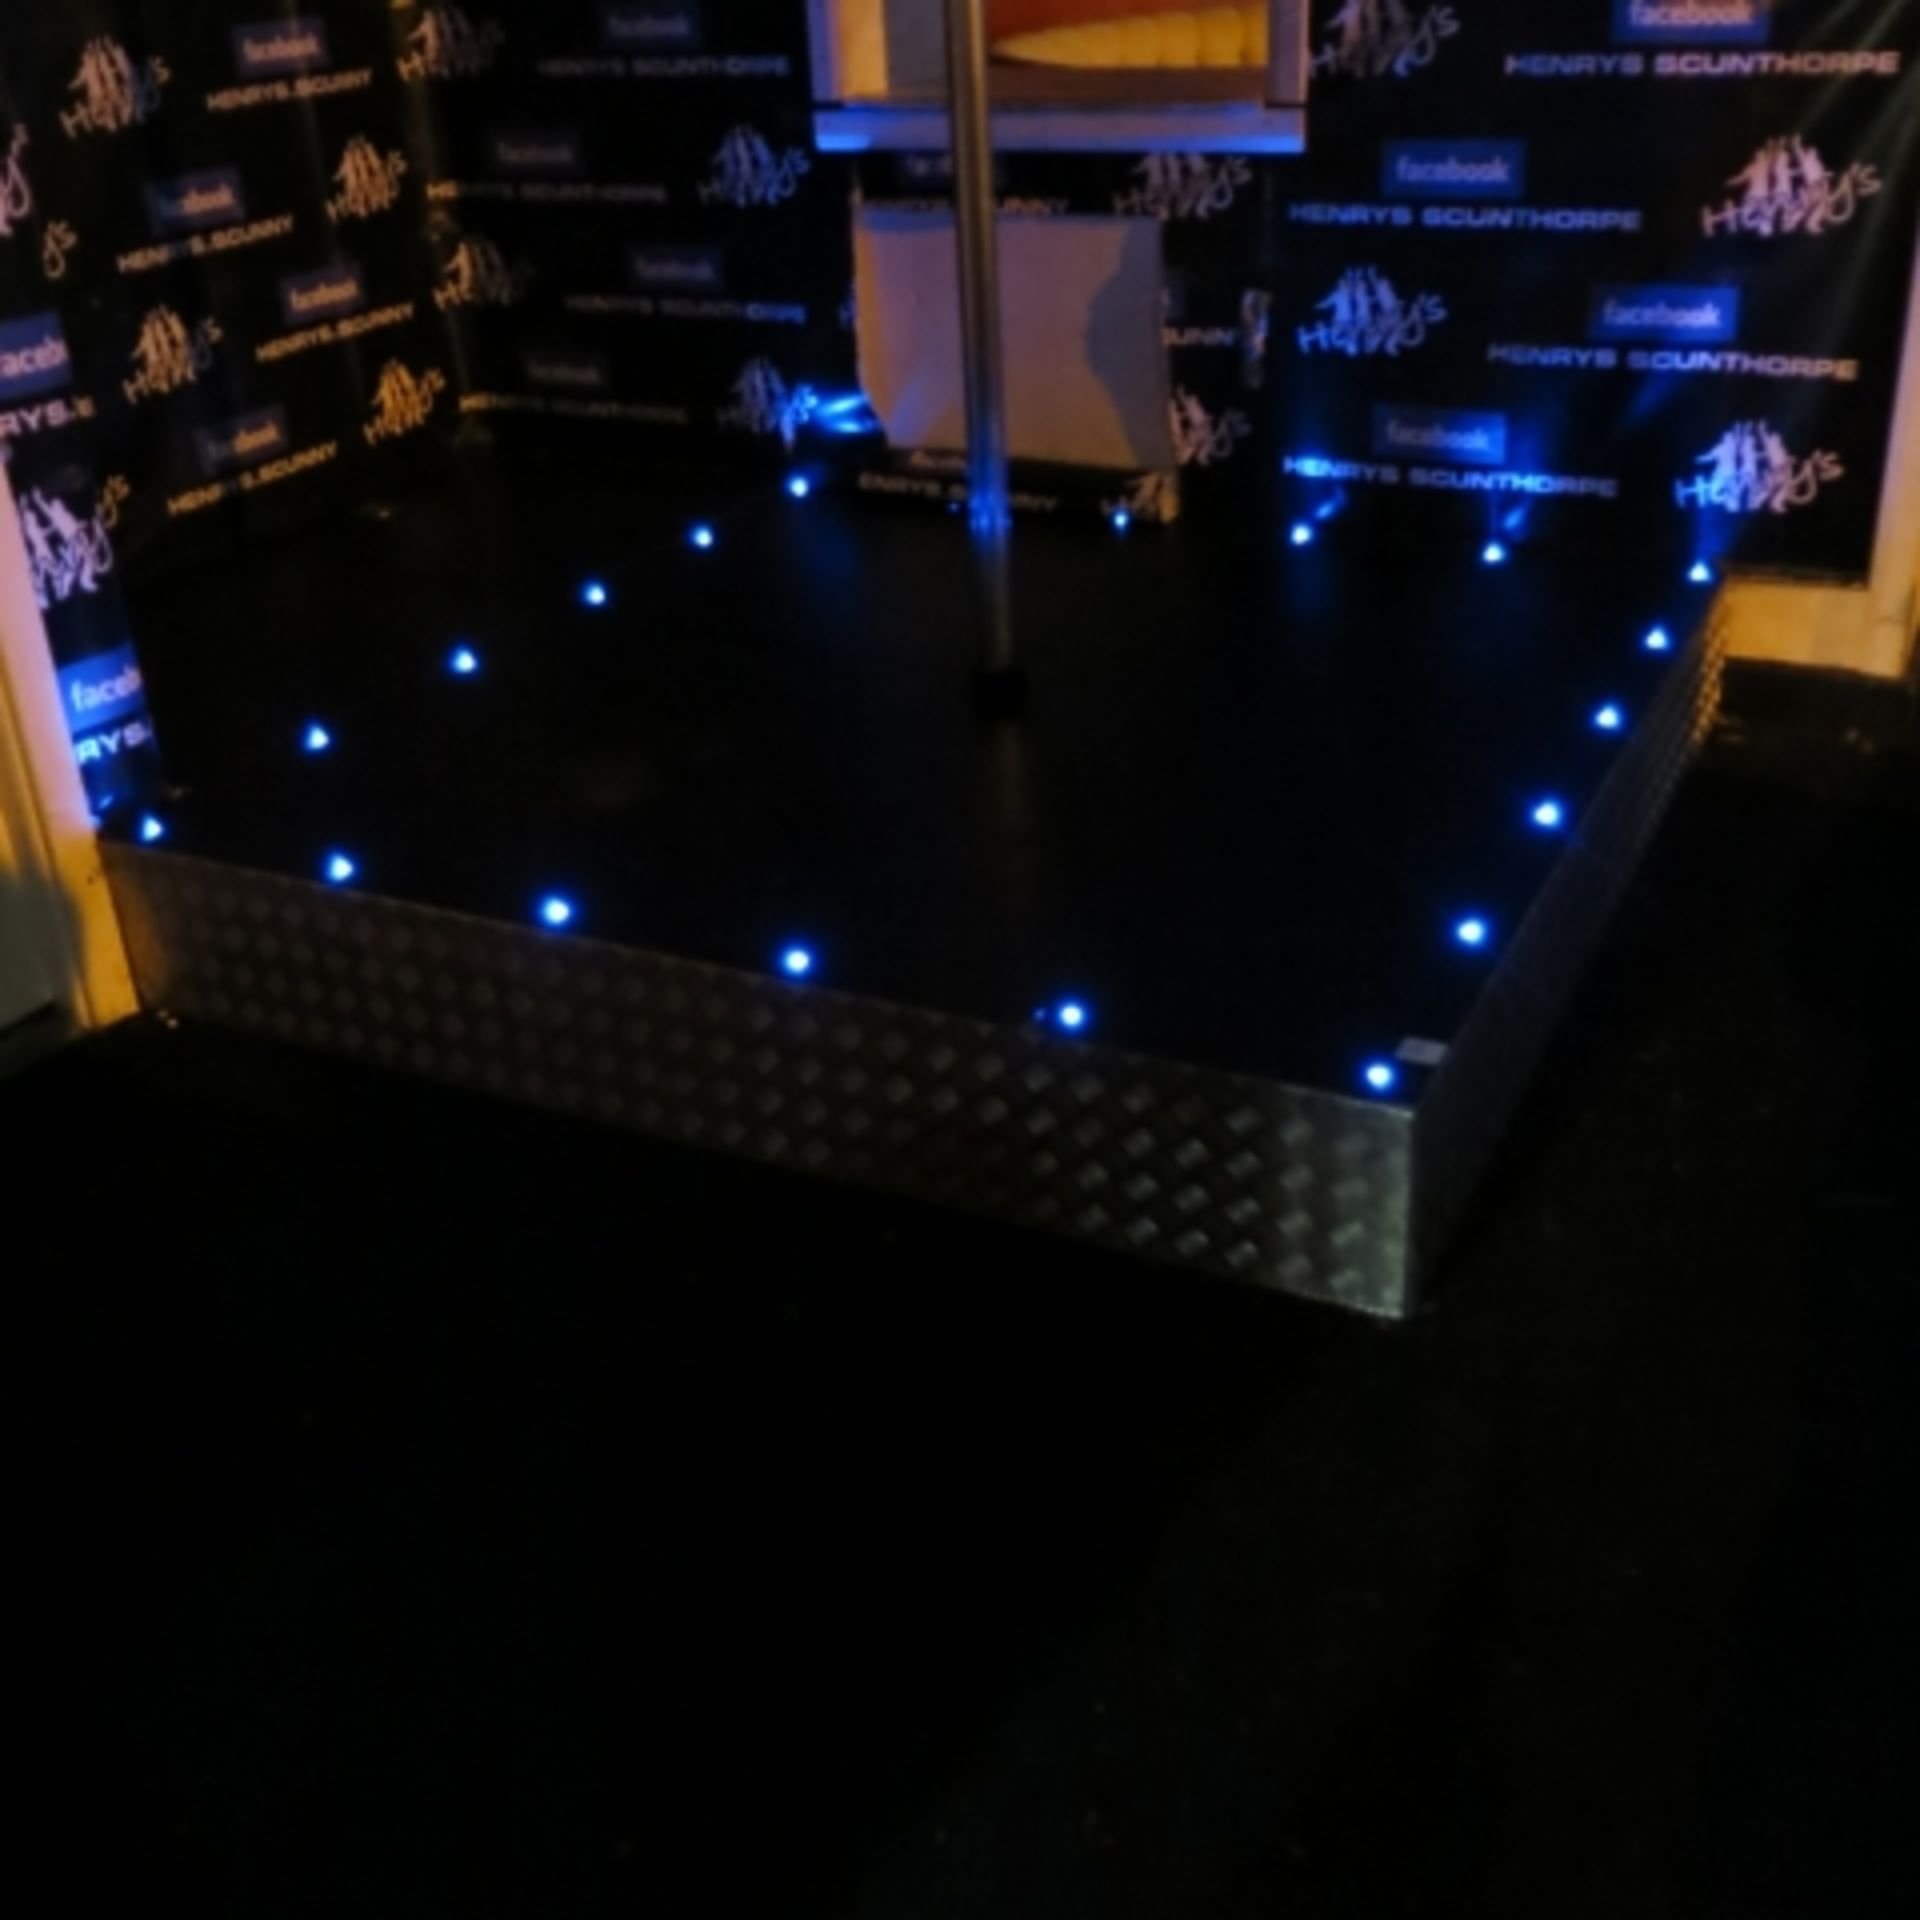 Stand Alone Pole Dancing Unit on an MDF/Checker Plated Stand c/w Blue Edge Lighting.  Buyer to - Image 2 of 2